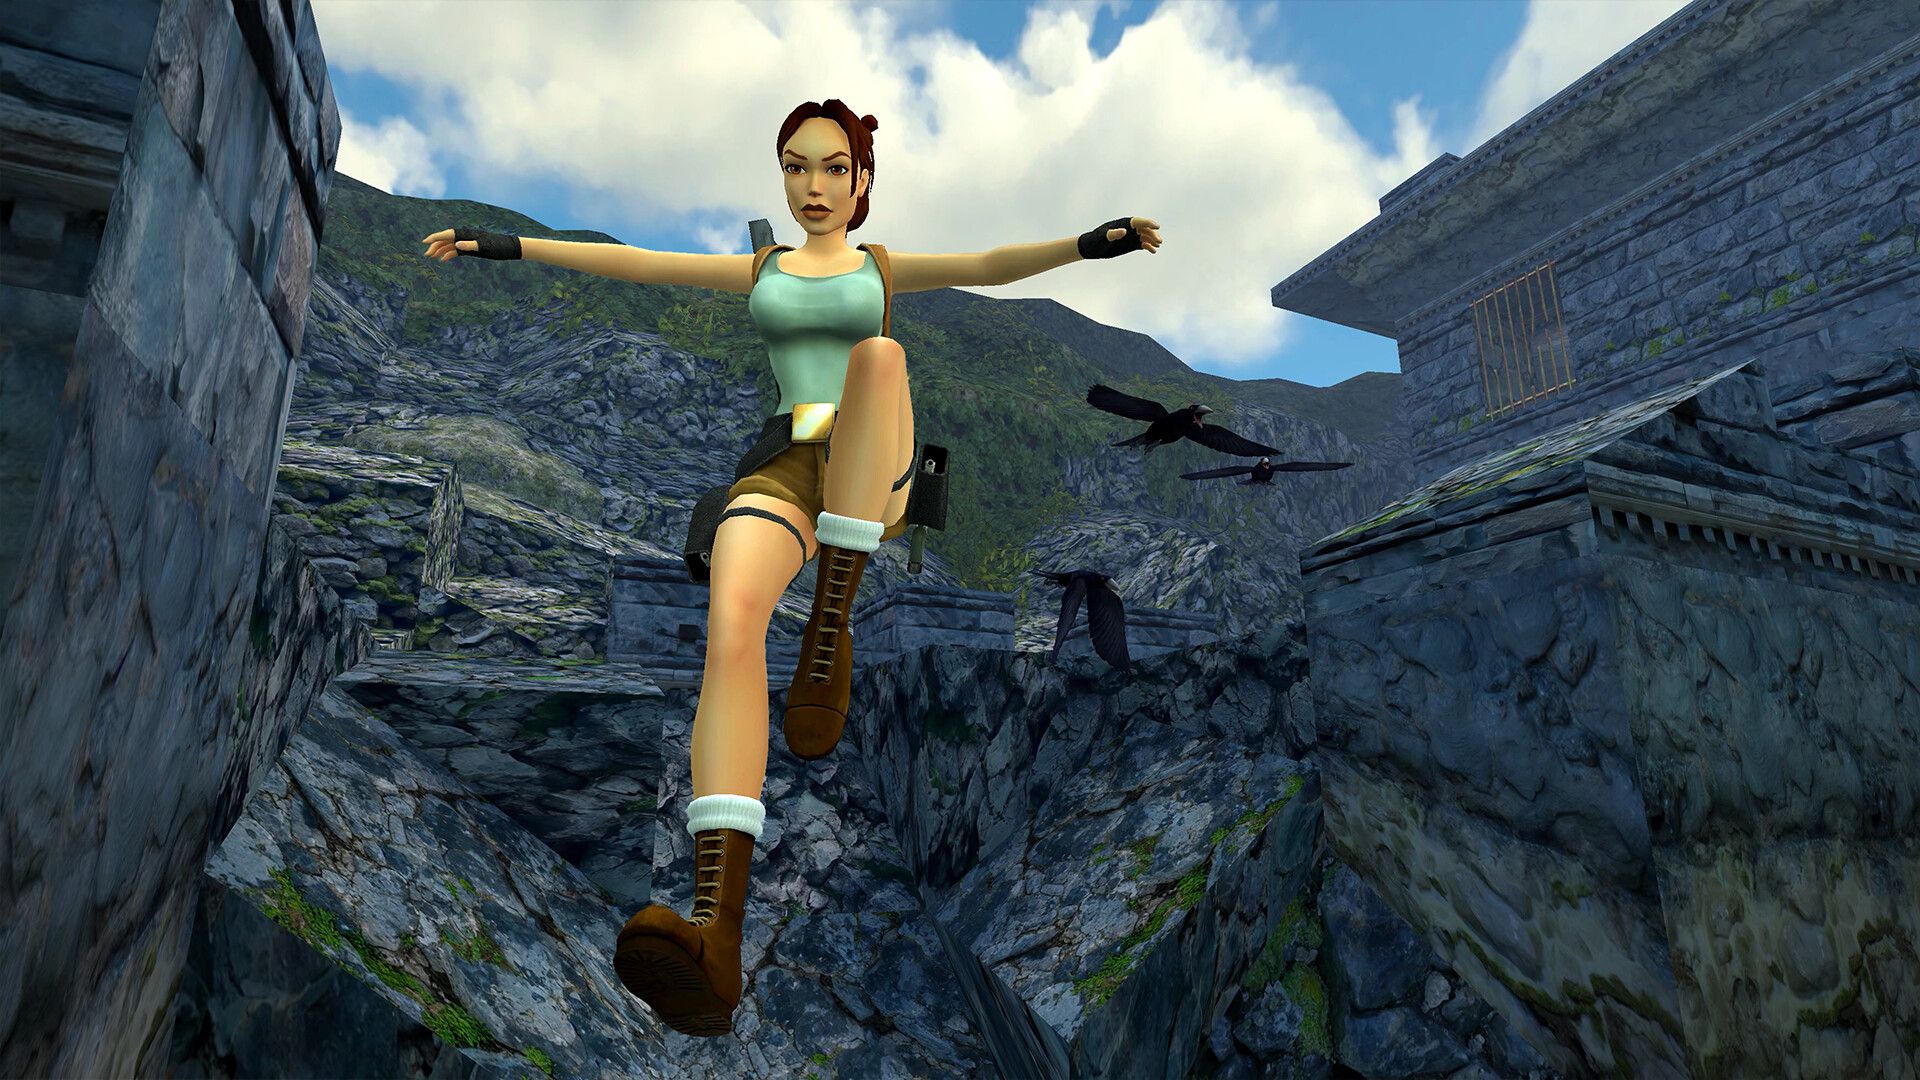 Lara Croft now has the leopard skin outfit in Tomb Raider I-III Remastered